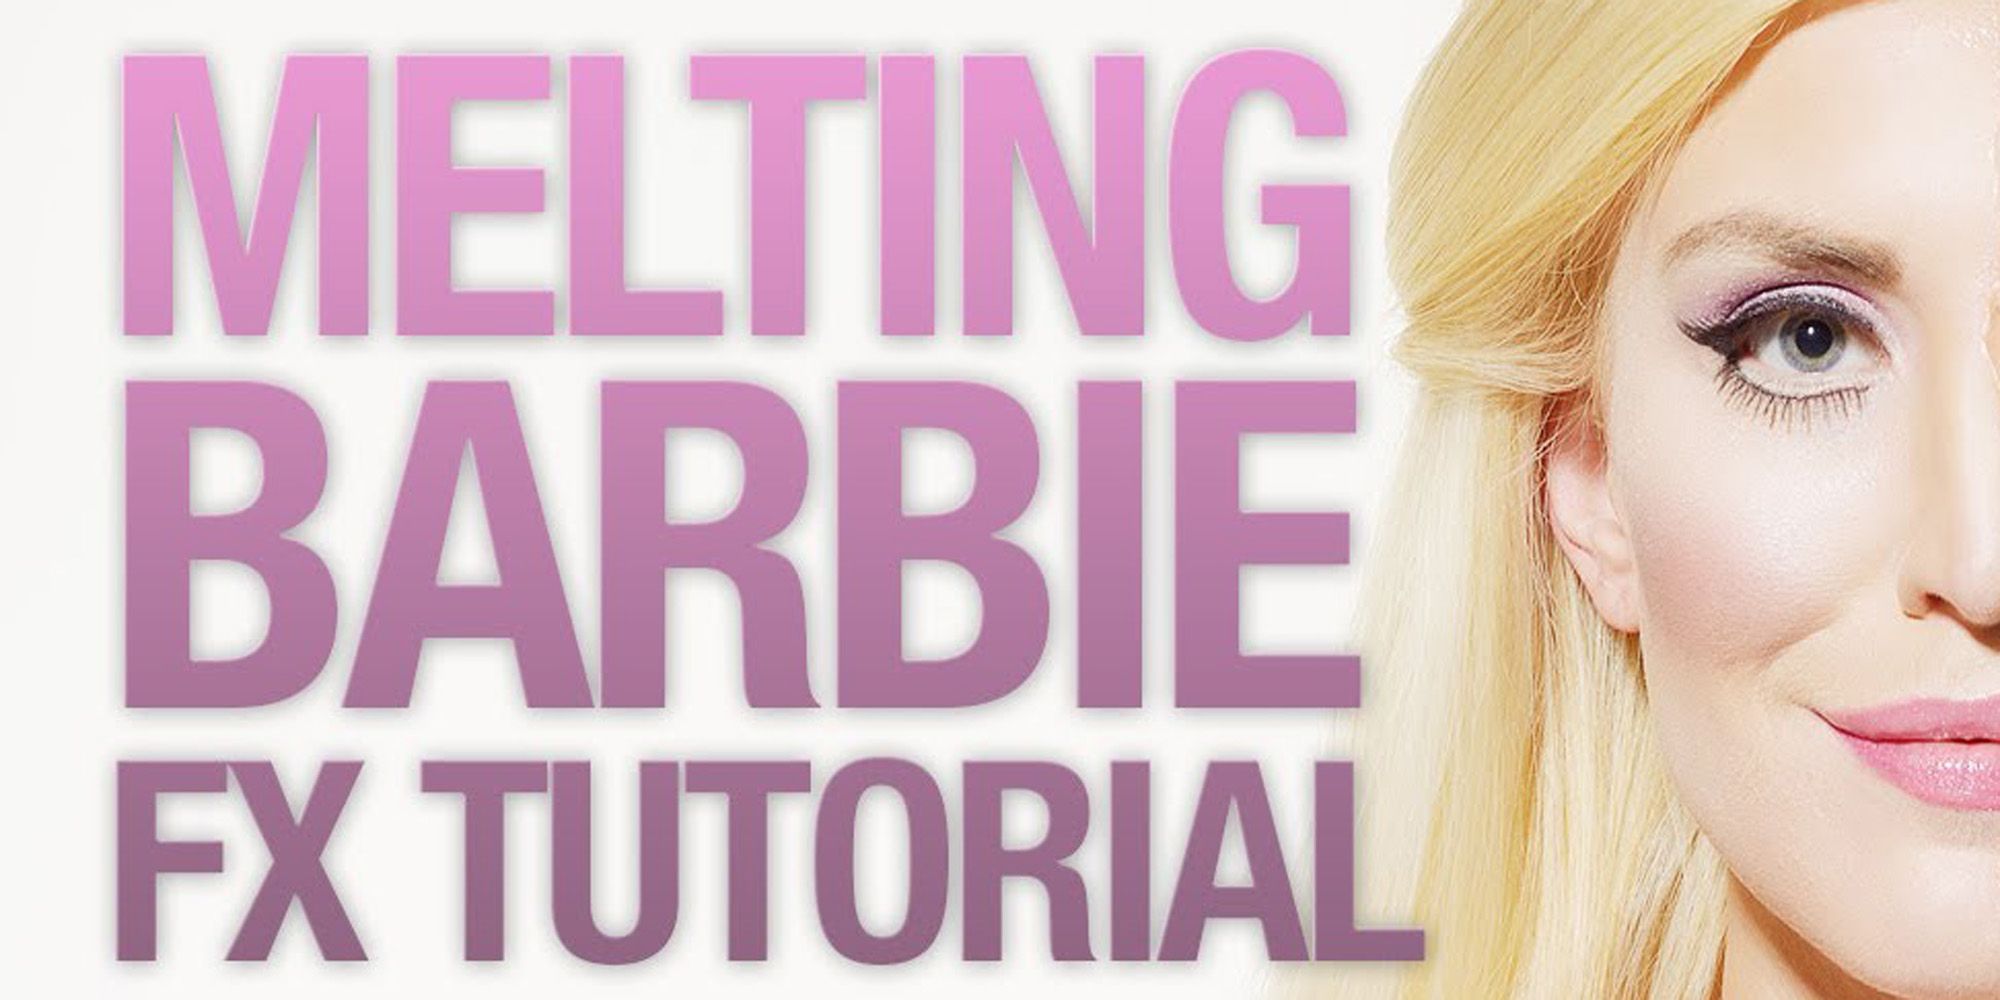 This Melting Barbie Makeup Tutorial Is Terrifying Melted Barbie